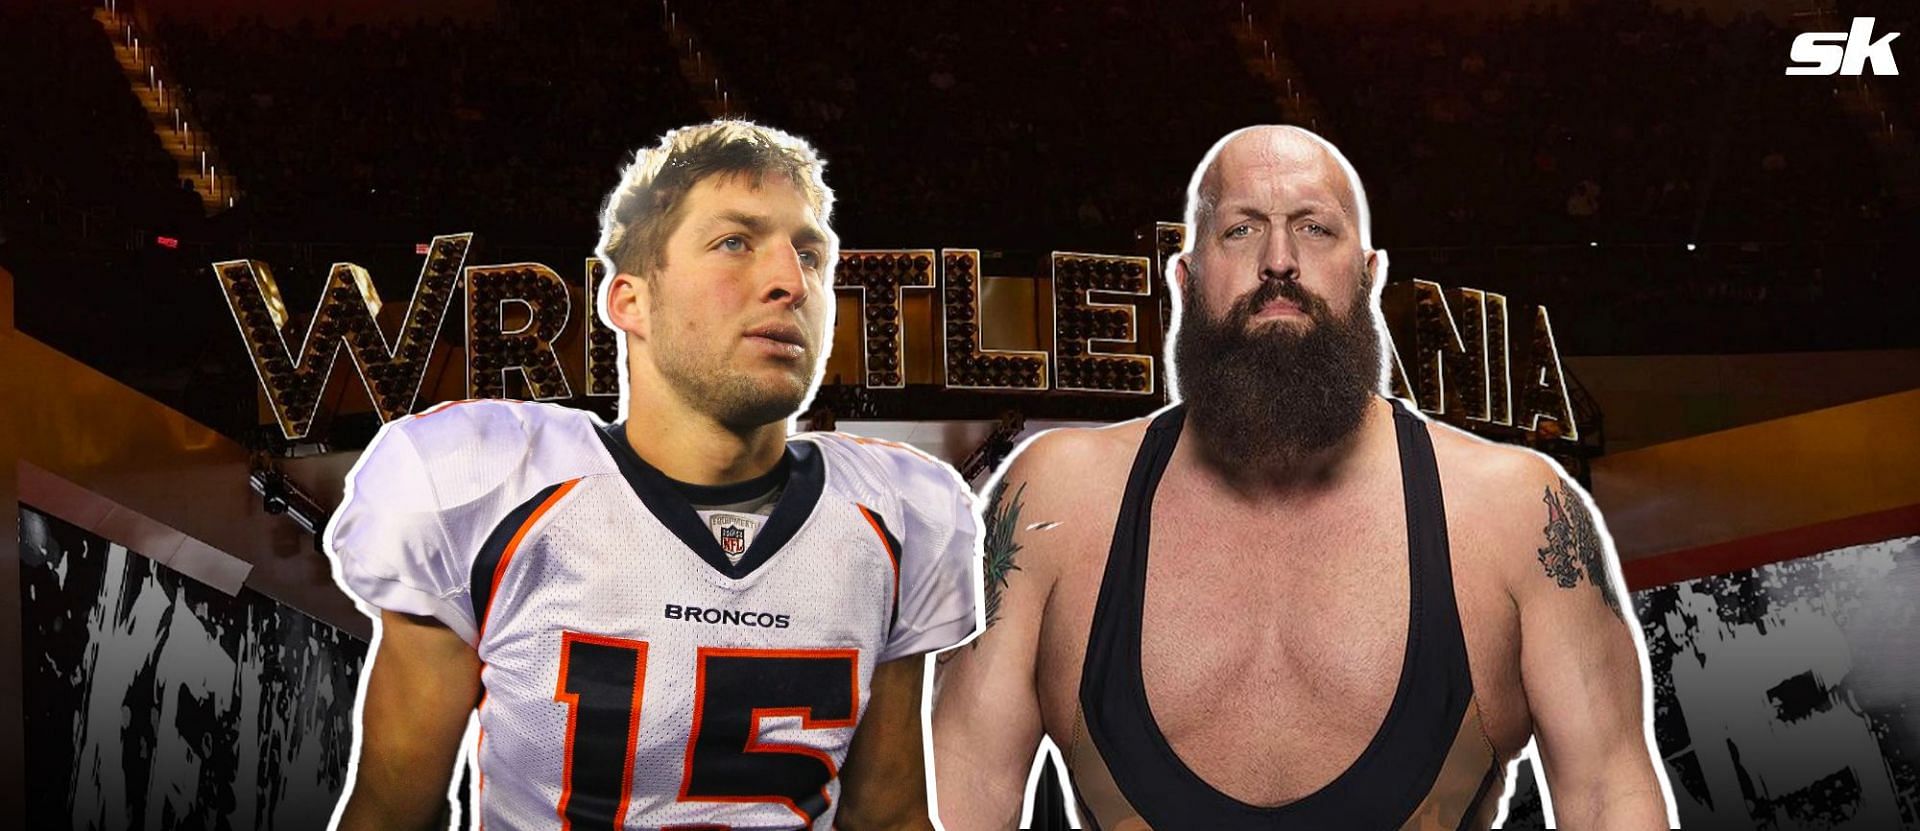 WWE president reveals details of &lsquo;top secret&rsquo; meeting for junked Tim Tebow vs Big Show match at WrestleMania after QB&rsquo;s Patriots exit